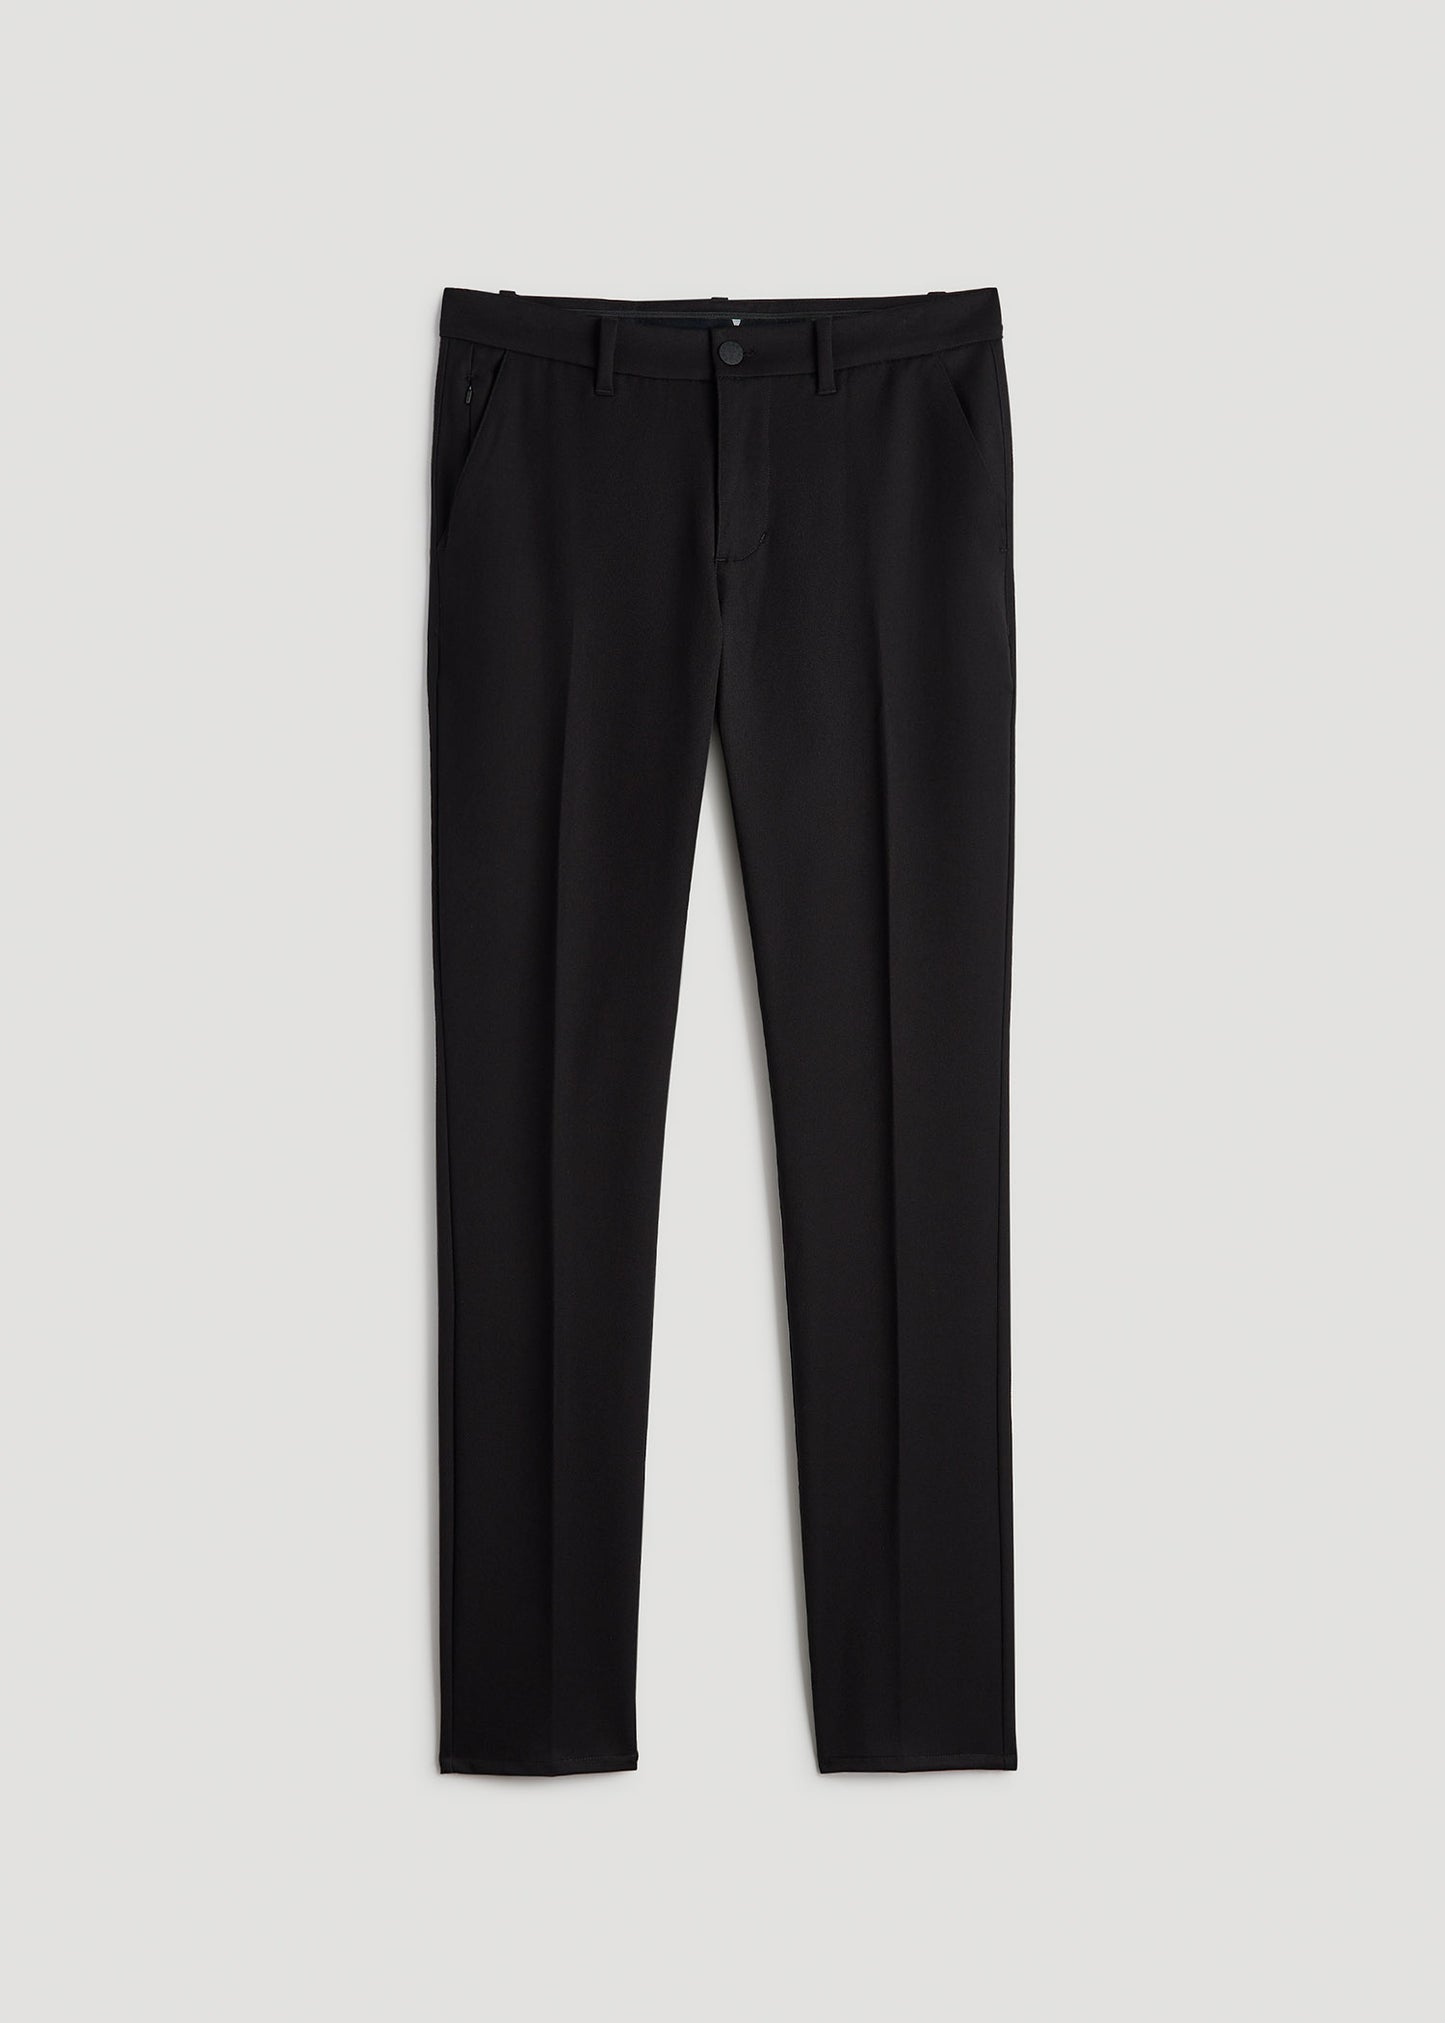 TAPERED-FIT Stretch Dress Pants for Tall Men in Black